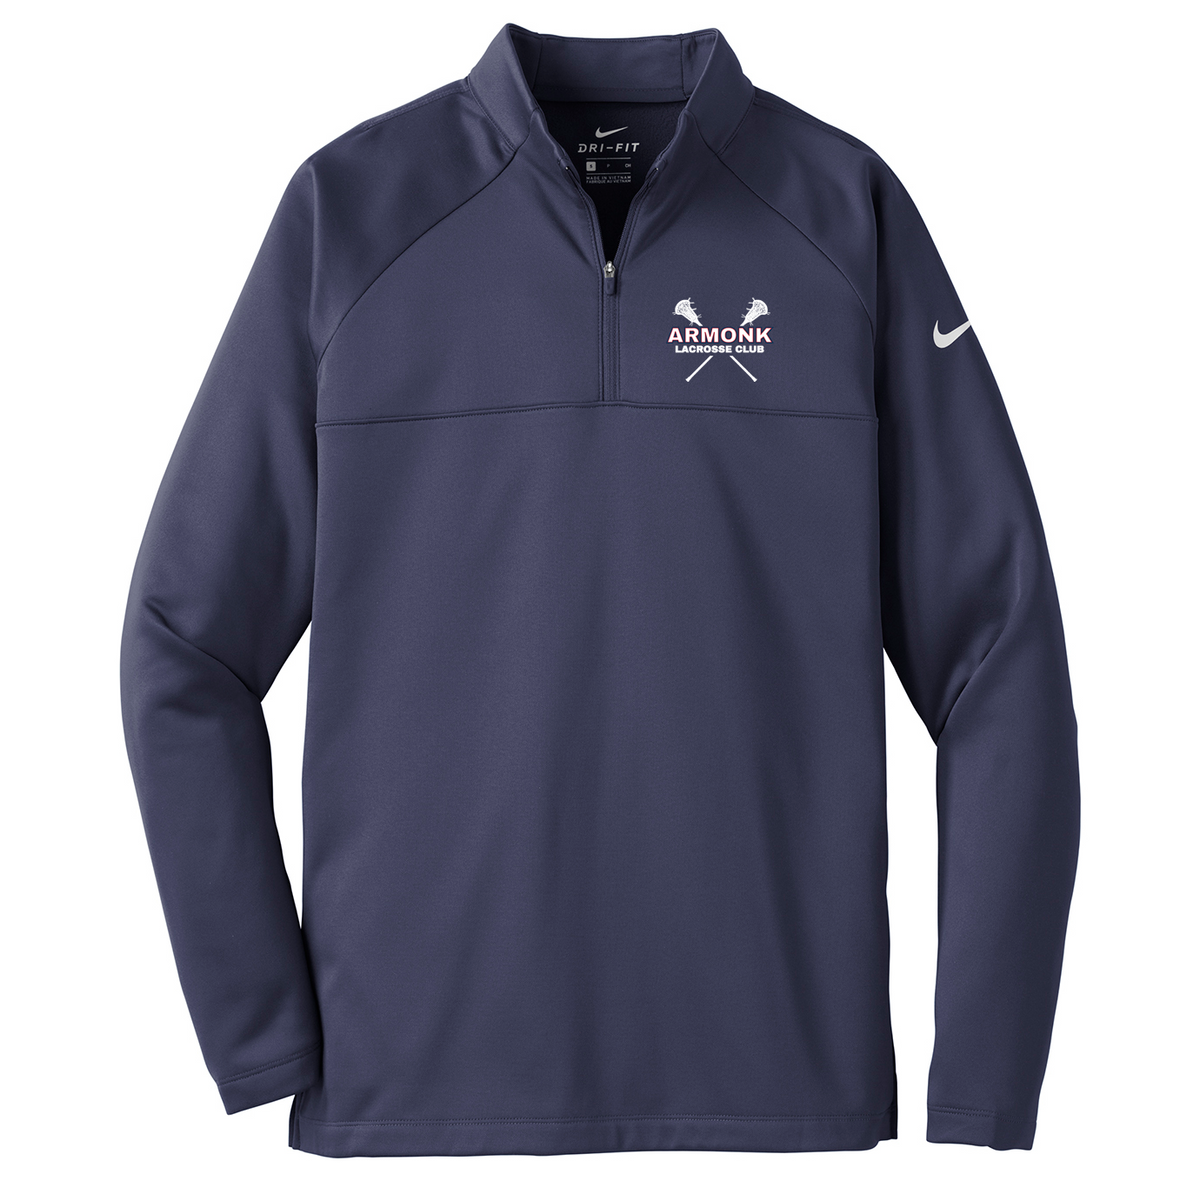 Armonk Lacrosse Club Nike Therma-FIT Quarter-Zip Fleece (Adult Only)